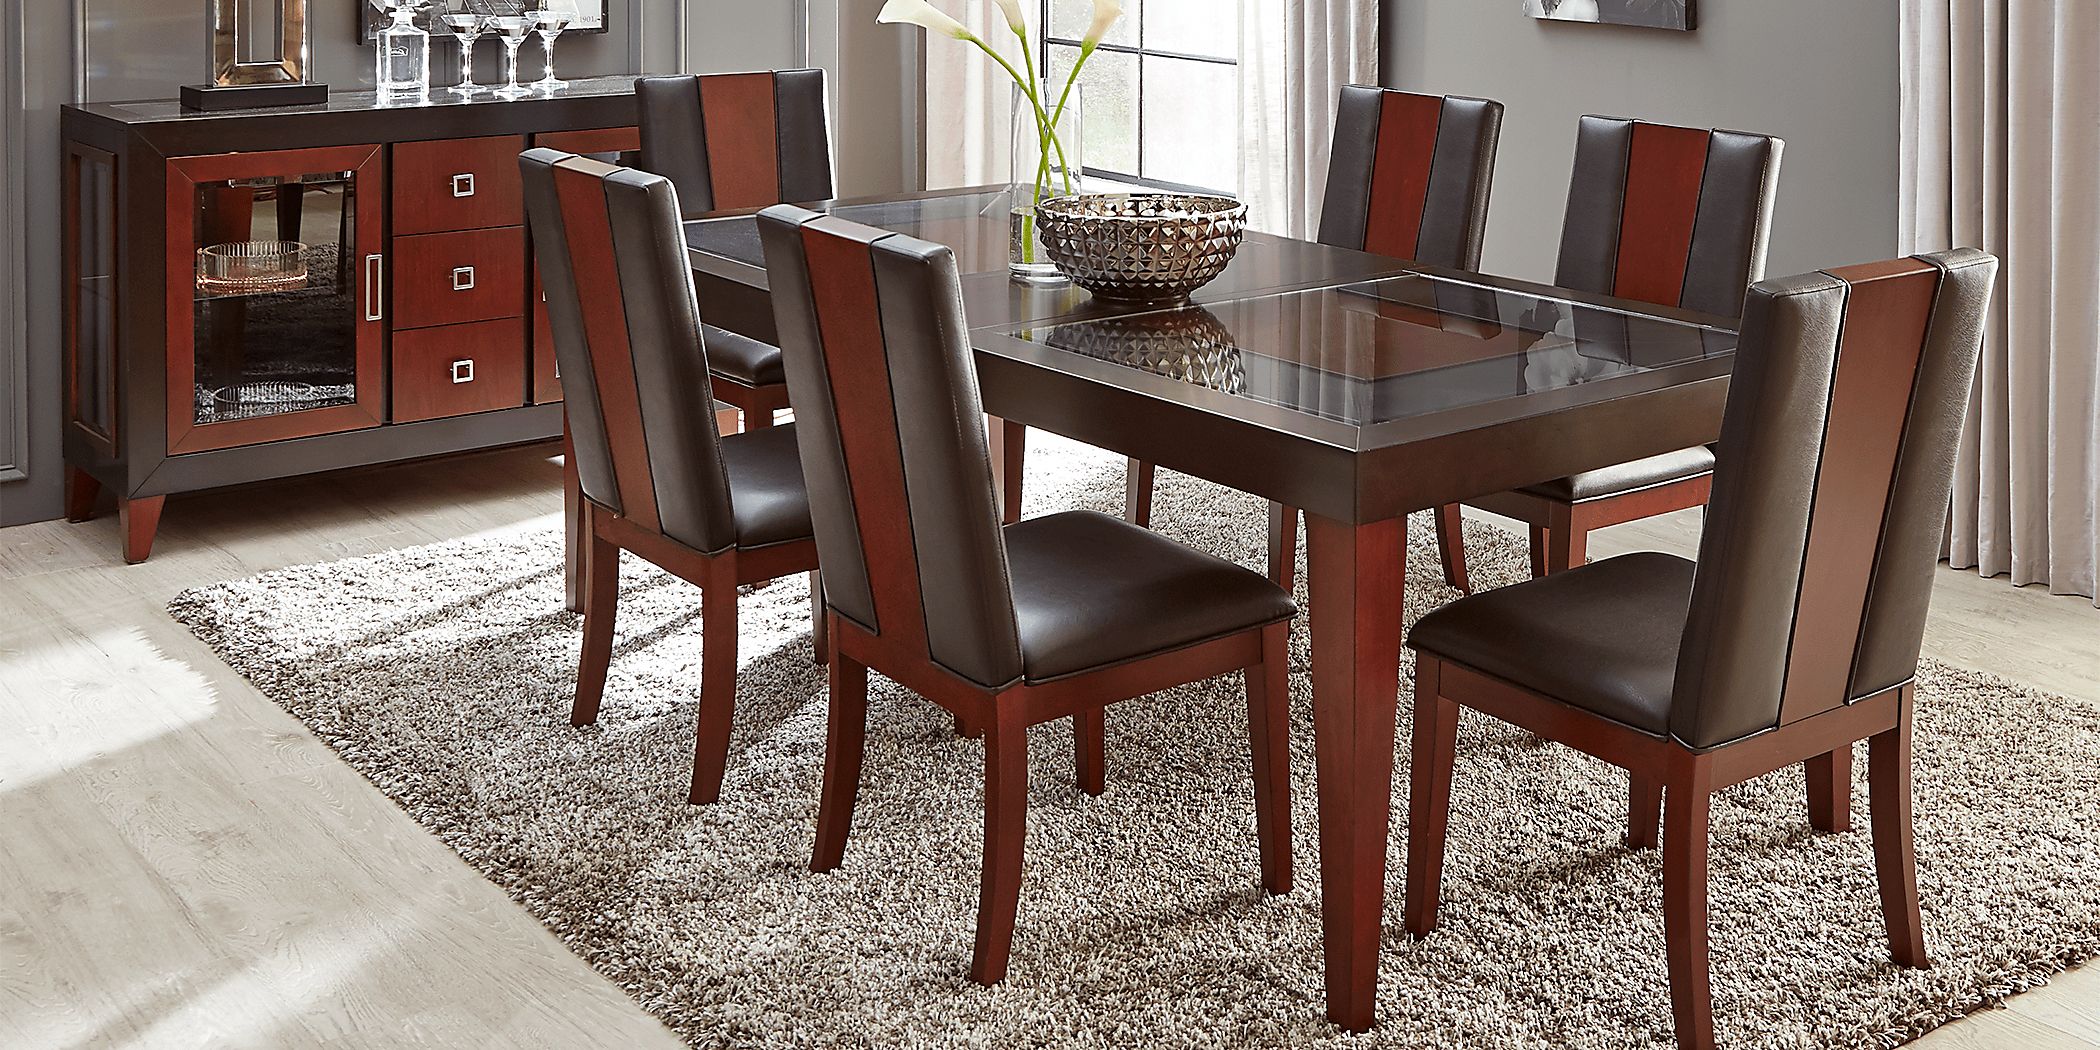 Aylesbury Brown Cherry 5 Pc Rectangle Dining Room